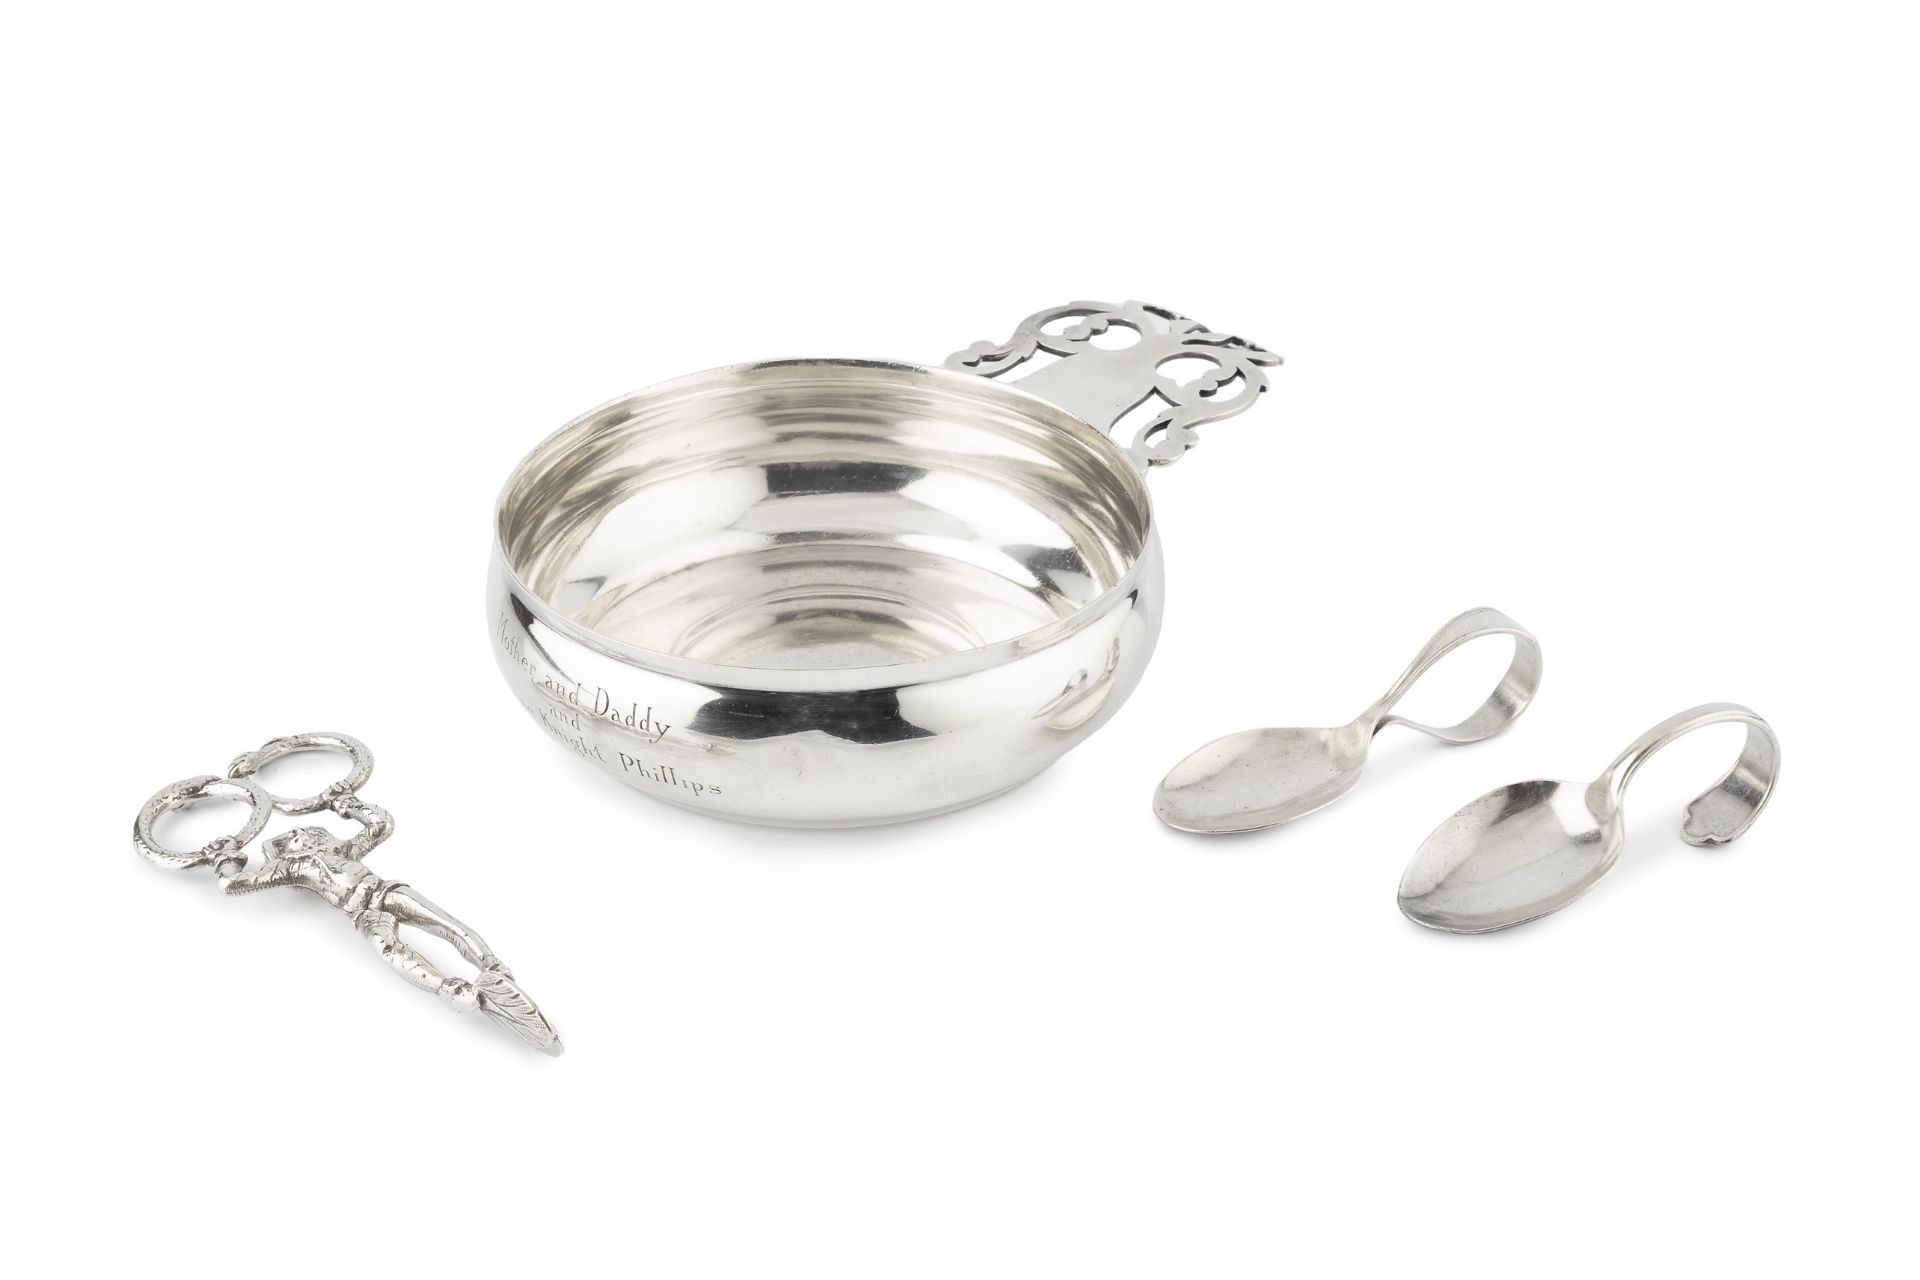 An American silver porringer by Tiffany & Co, with pierced handle, after the original design by Paul